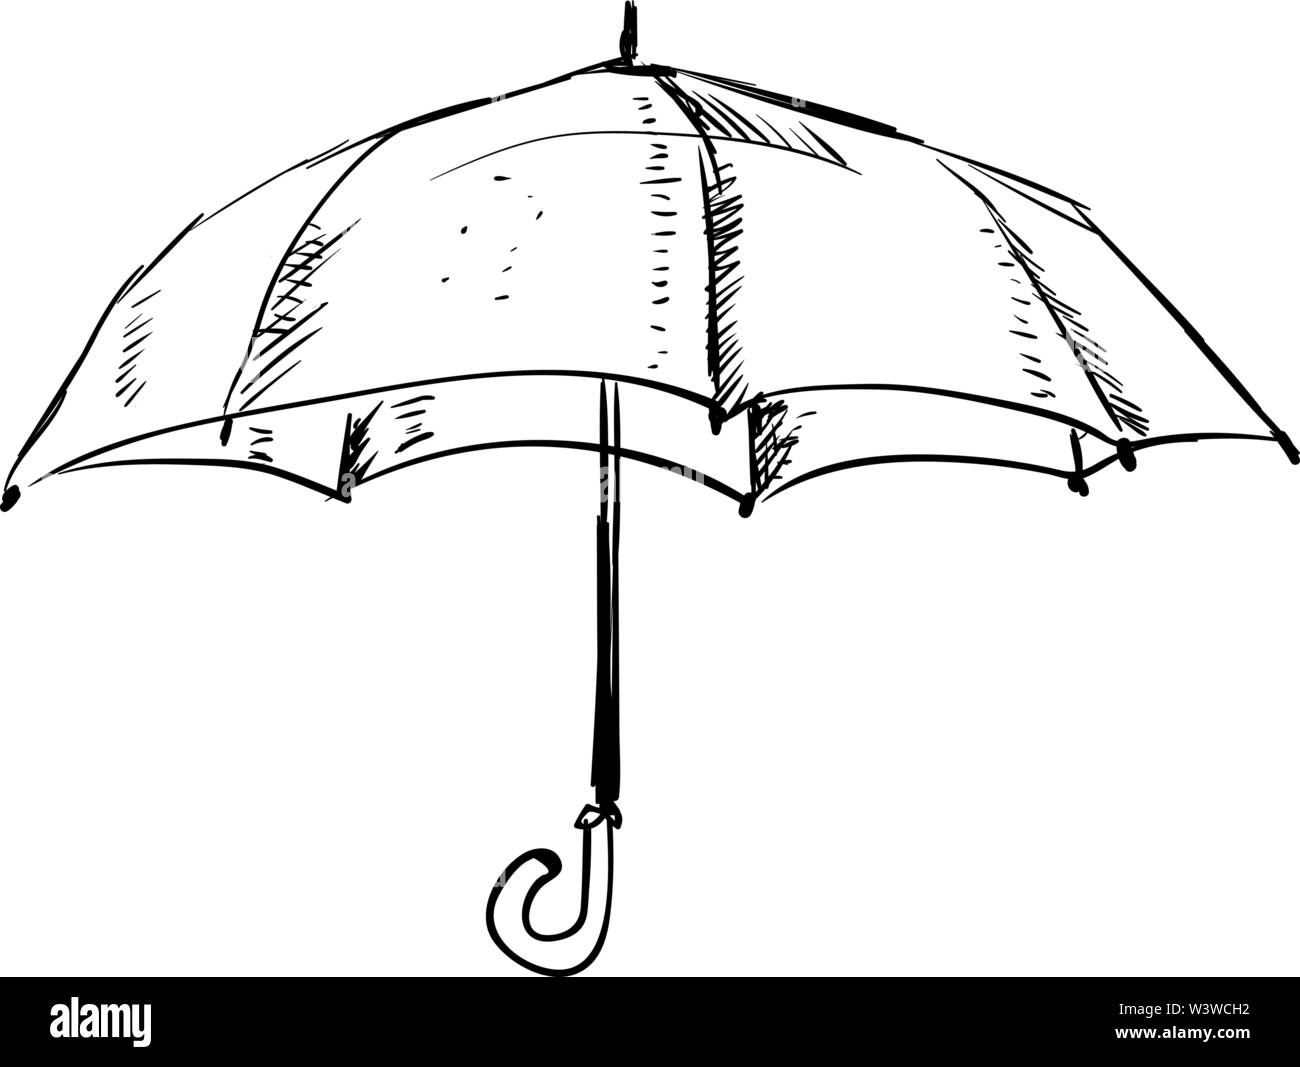 Umbrella drawing, illustration, vector on white background. Stock Vector